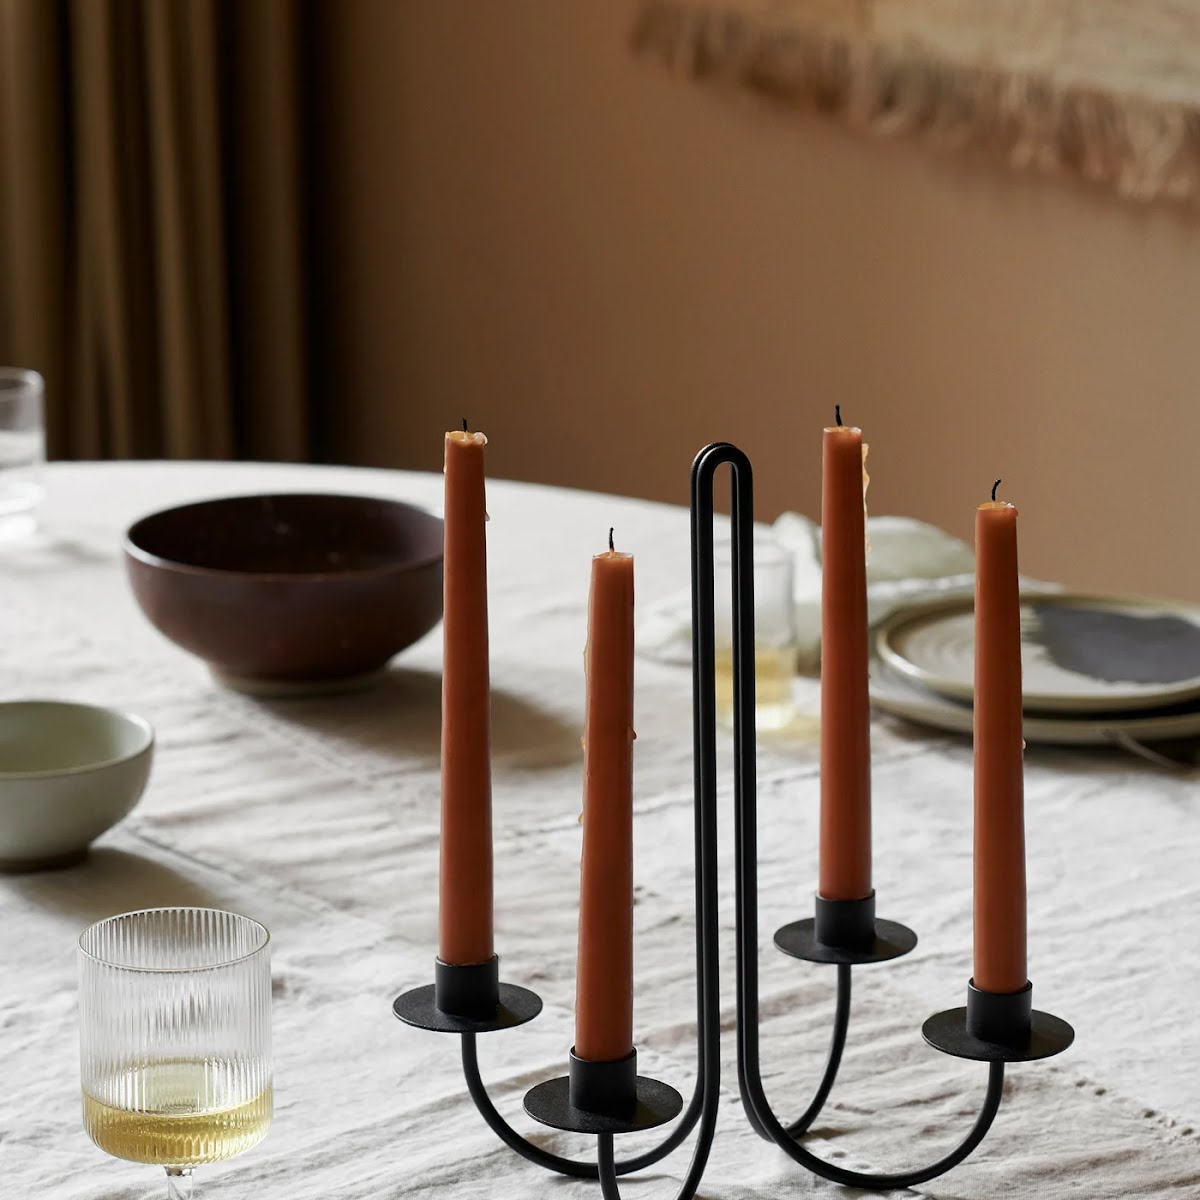 April + The Bear, Sway Candelabra Stand, €69